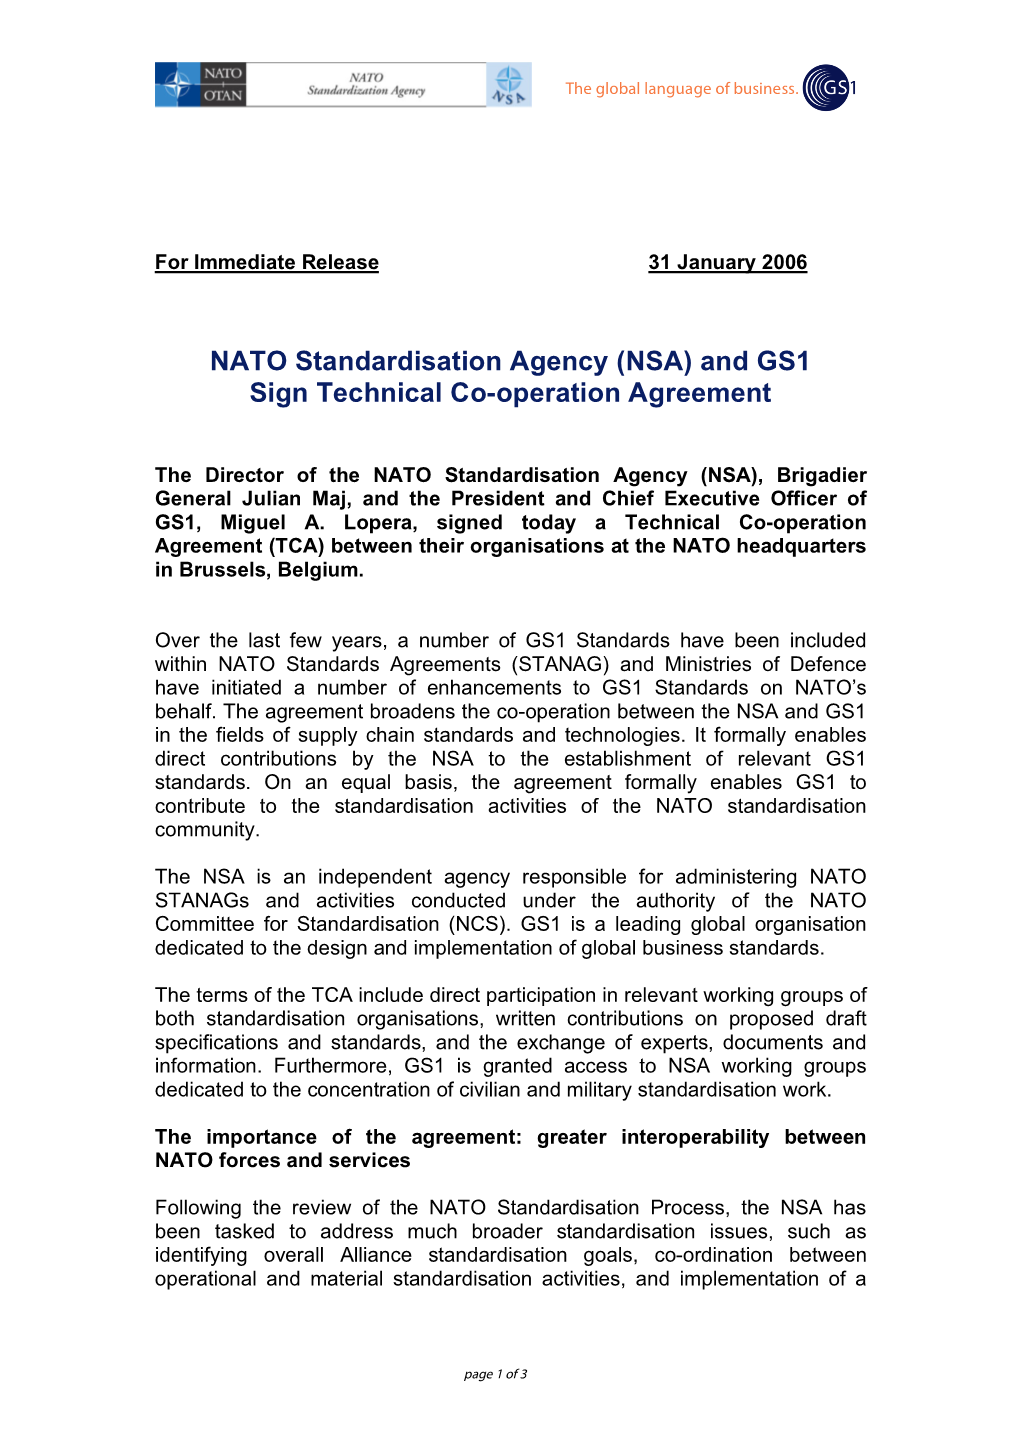 NATO Standardisation Agency (NSA) and GS1 Sign Technical Co-Operation Agreement